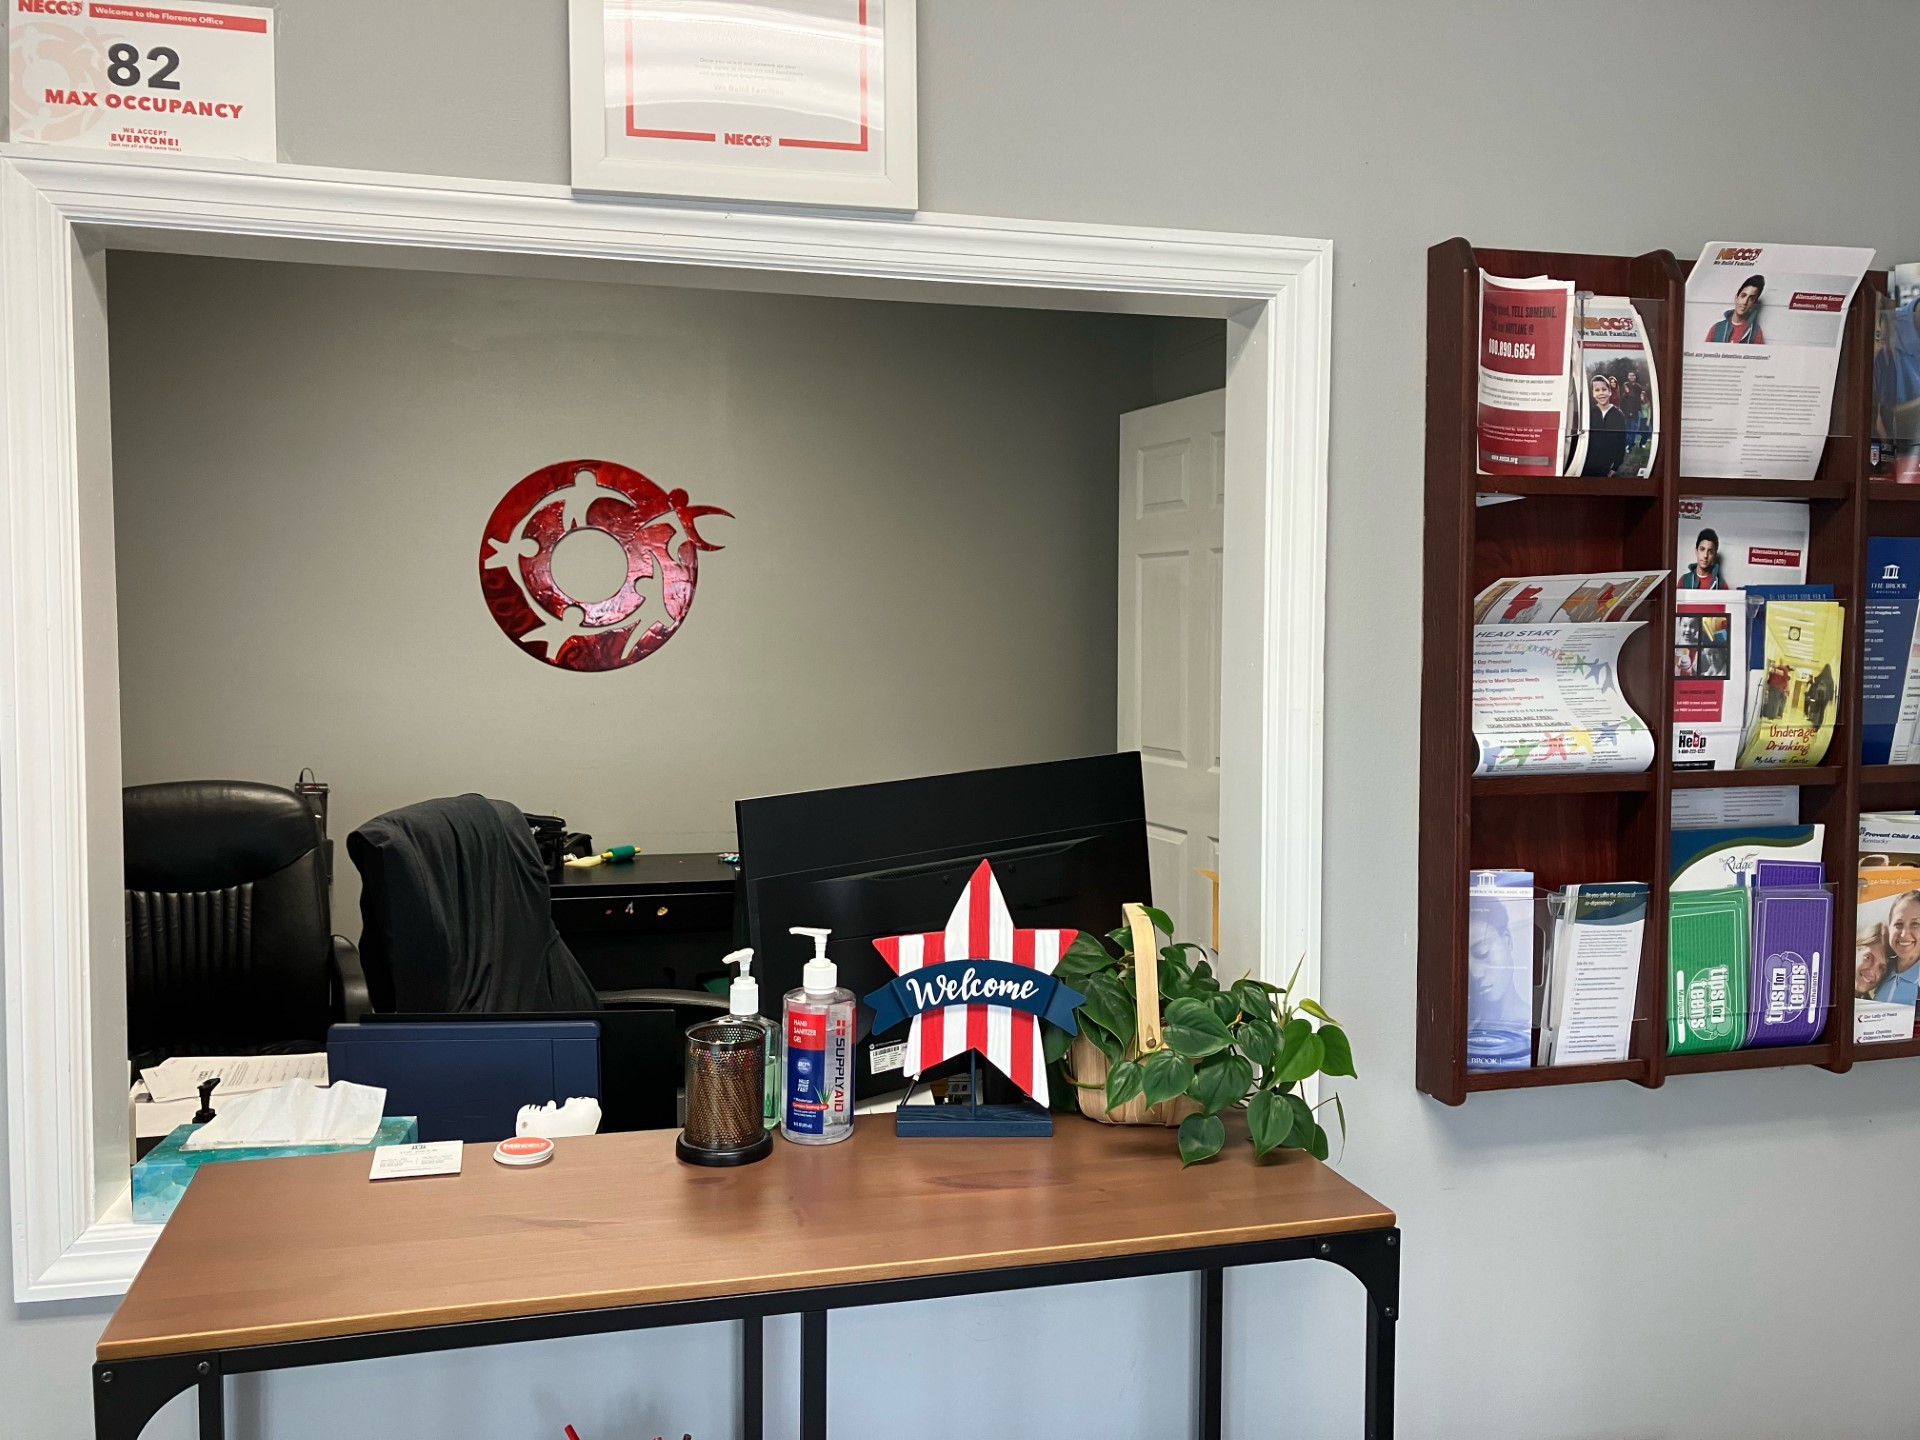 Front reception desk at the Necco Florence office.